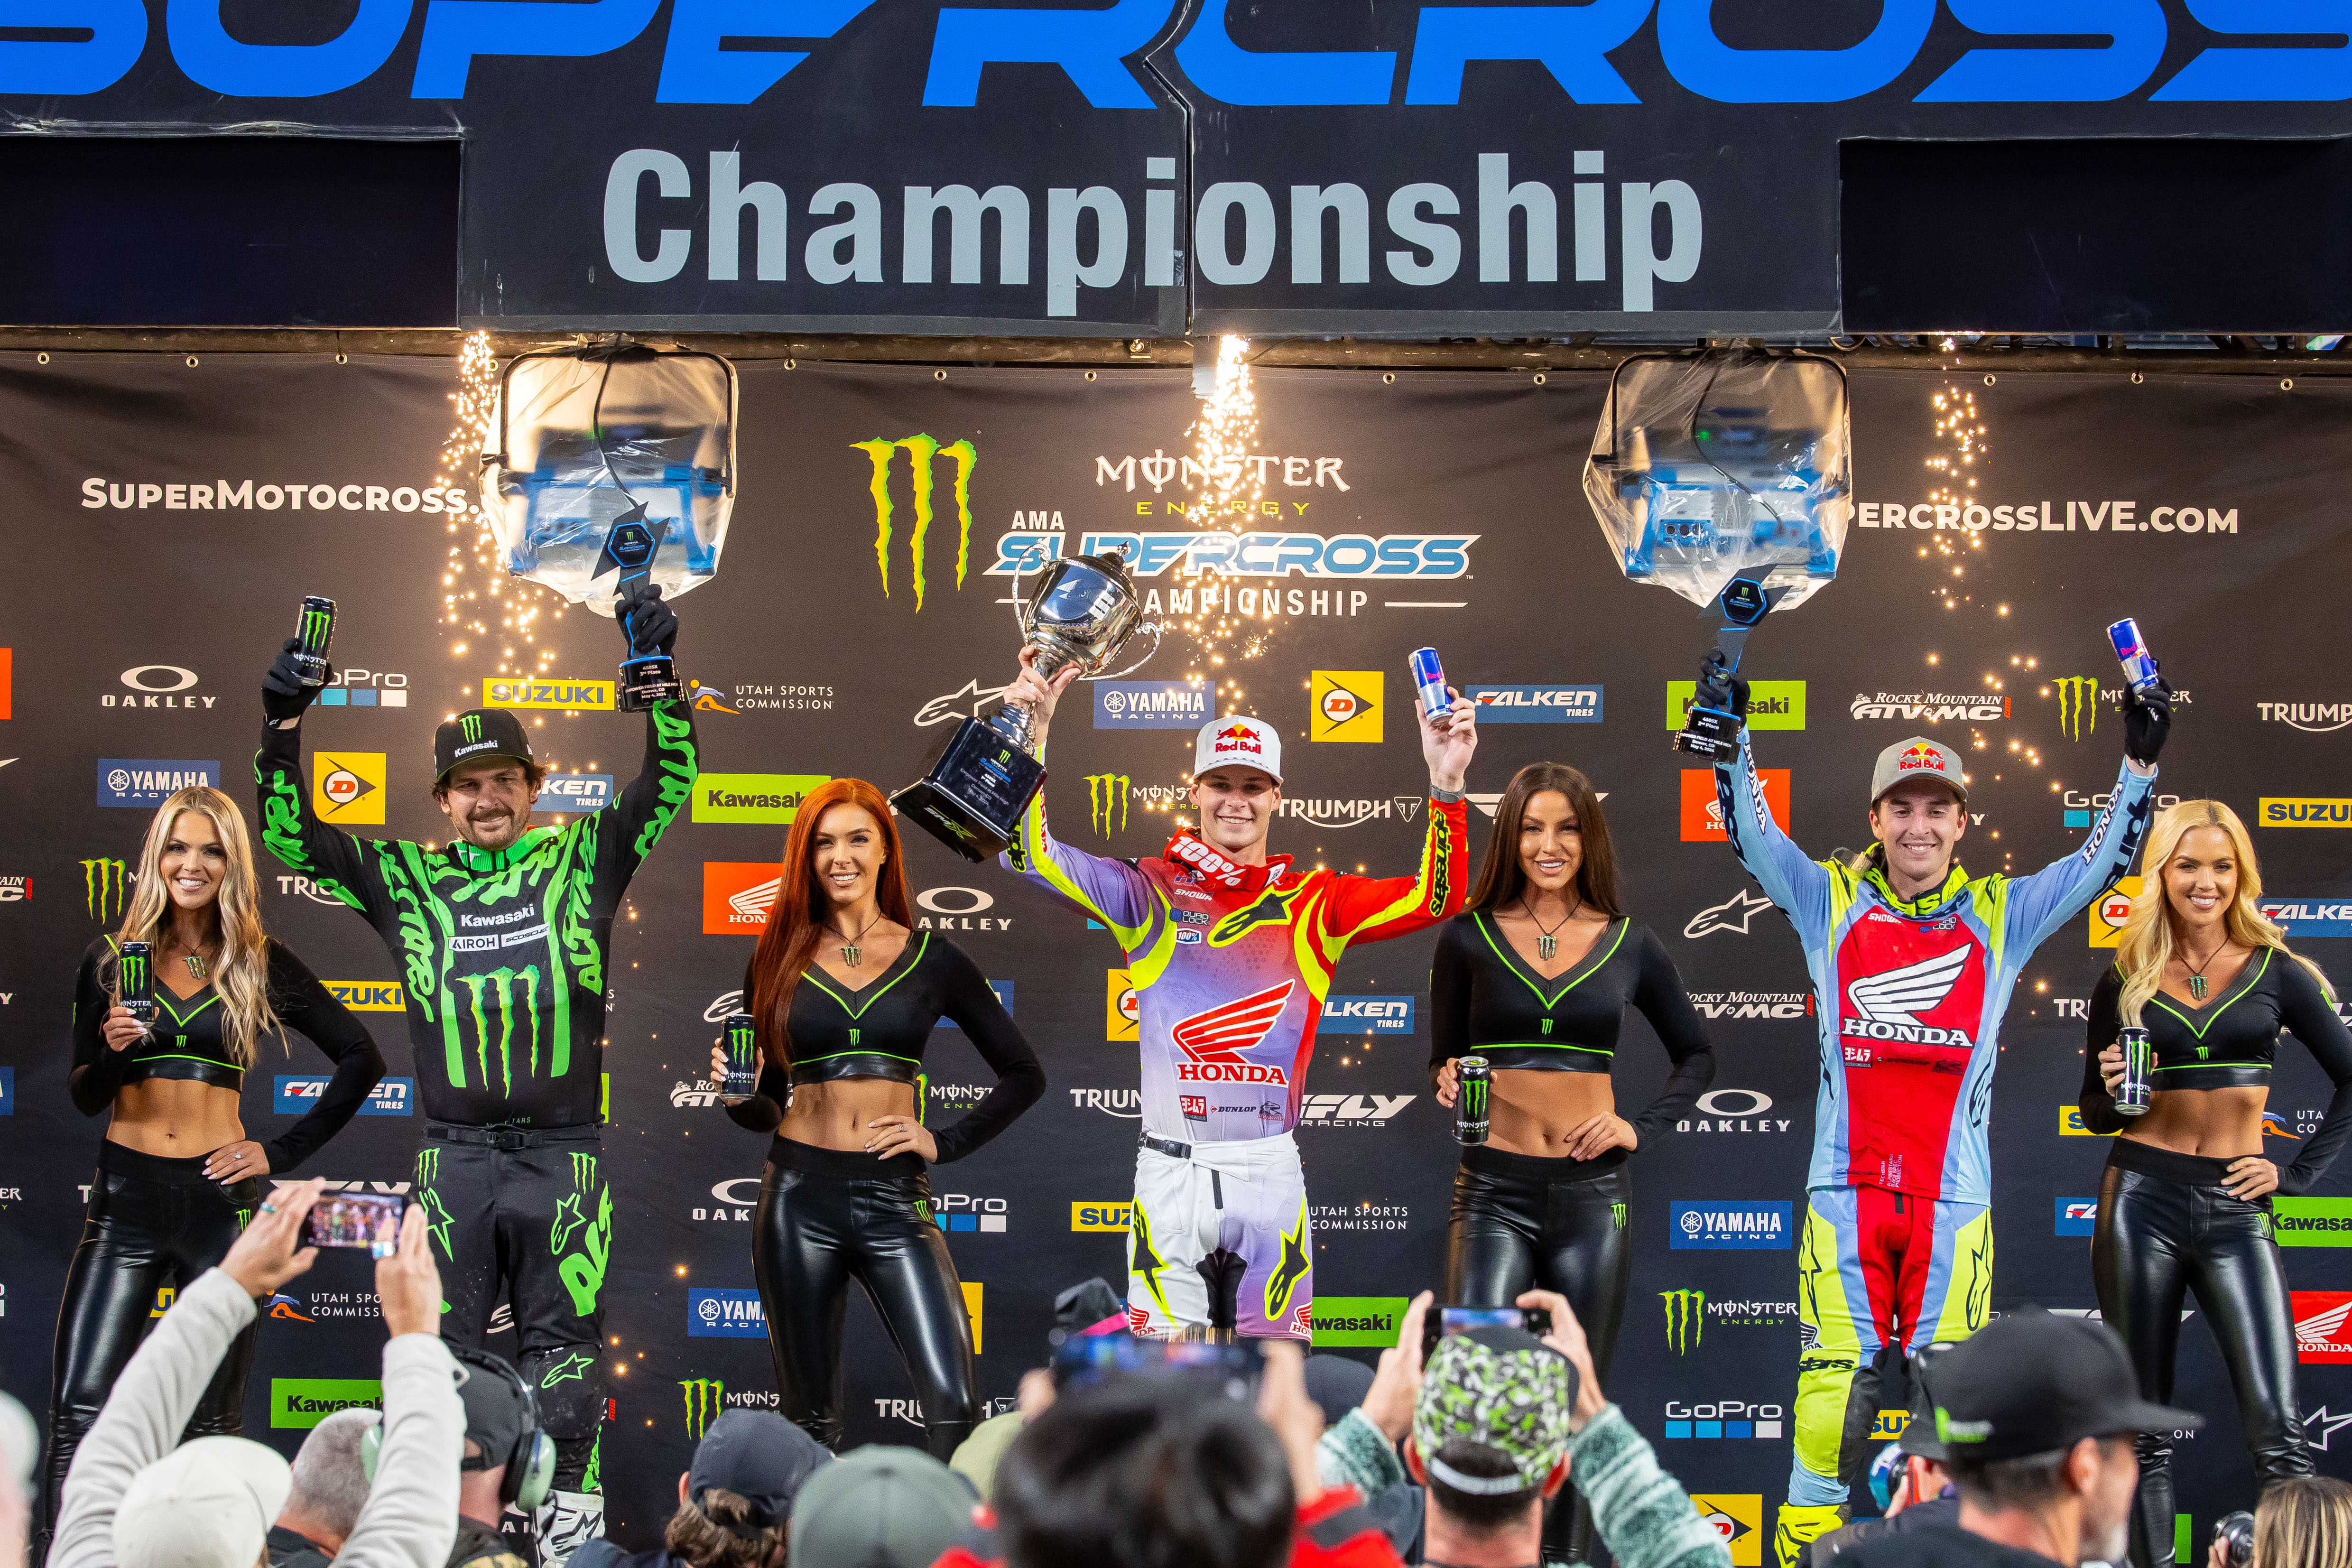 The Lawrence brothers became the first brothers in Supercross history to finish 1-2.